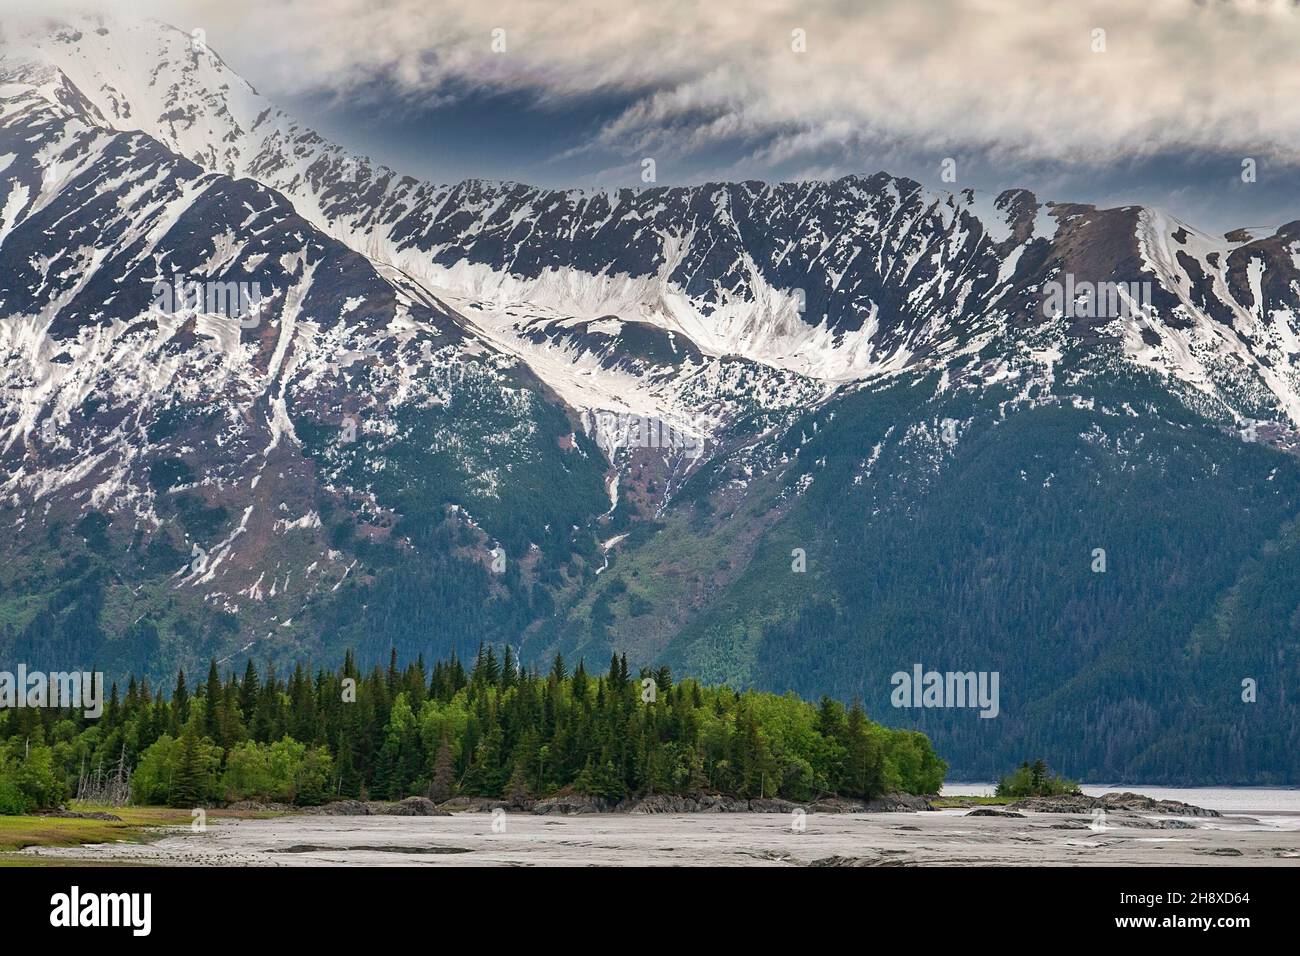 Majestic Alaska landscape with green forests and rugged snow capped mountains. Stock Photo